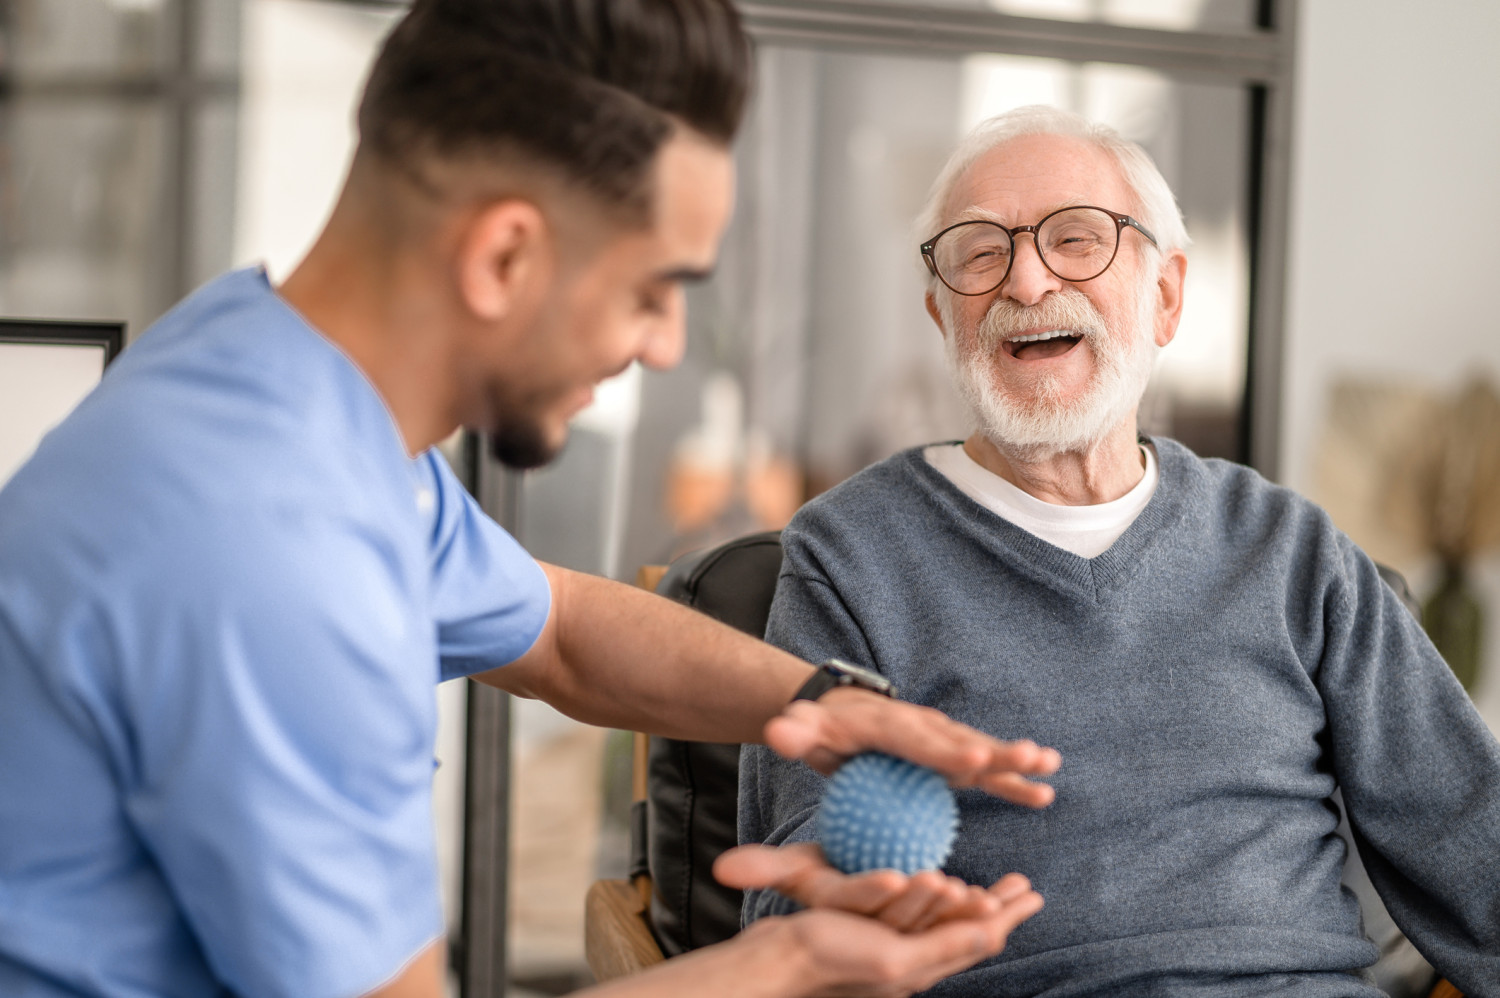 A senior gentleman shares a joyful moment with an allied health physiotherapist during a rehabilitation session, highlighting the therapeutic relationship and the commitment to enhancing mobility and independence in the elderly.